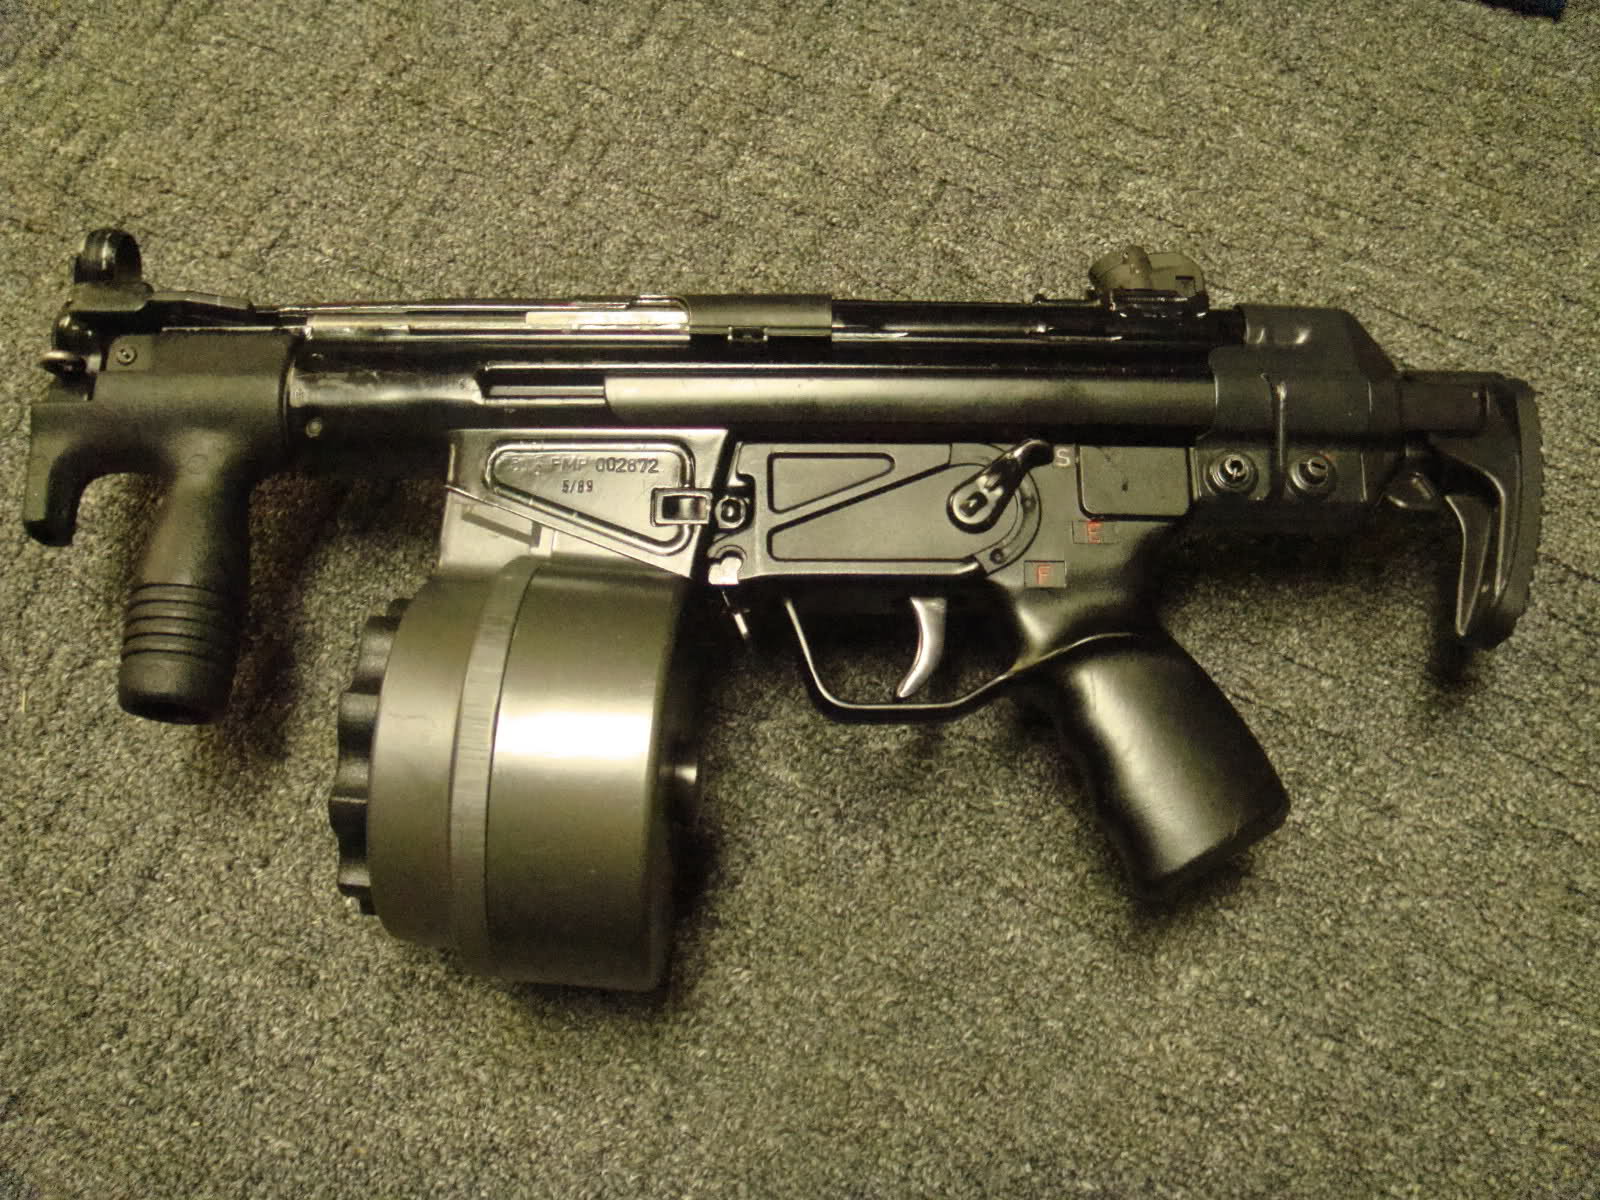 customized HK G3, with ultra-short barrel, MP5K foregrip, and drum magazine...